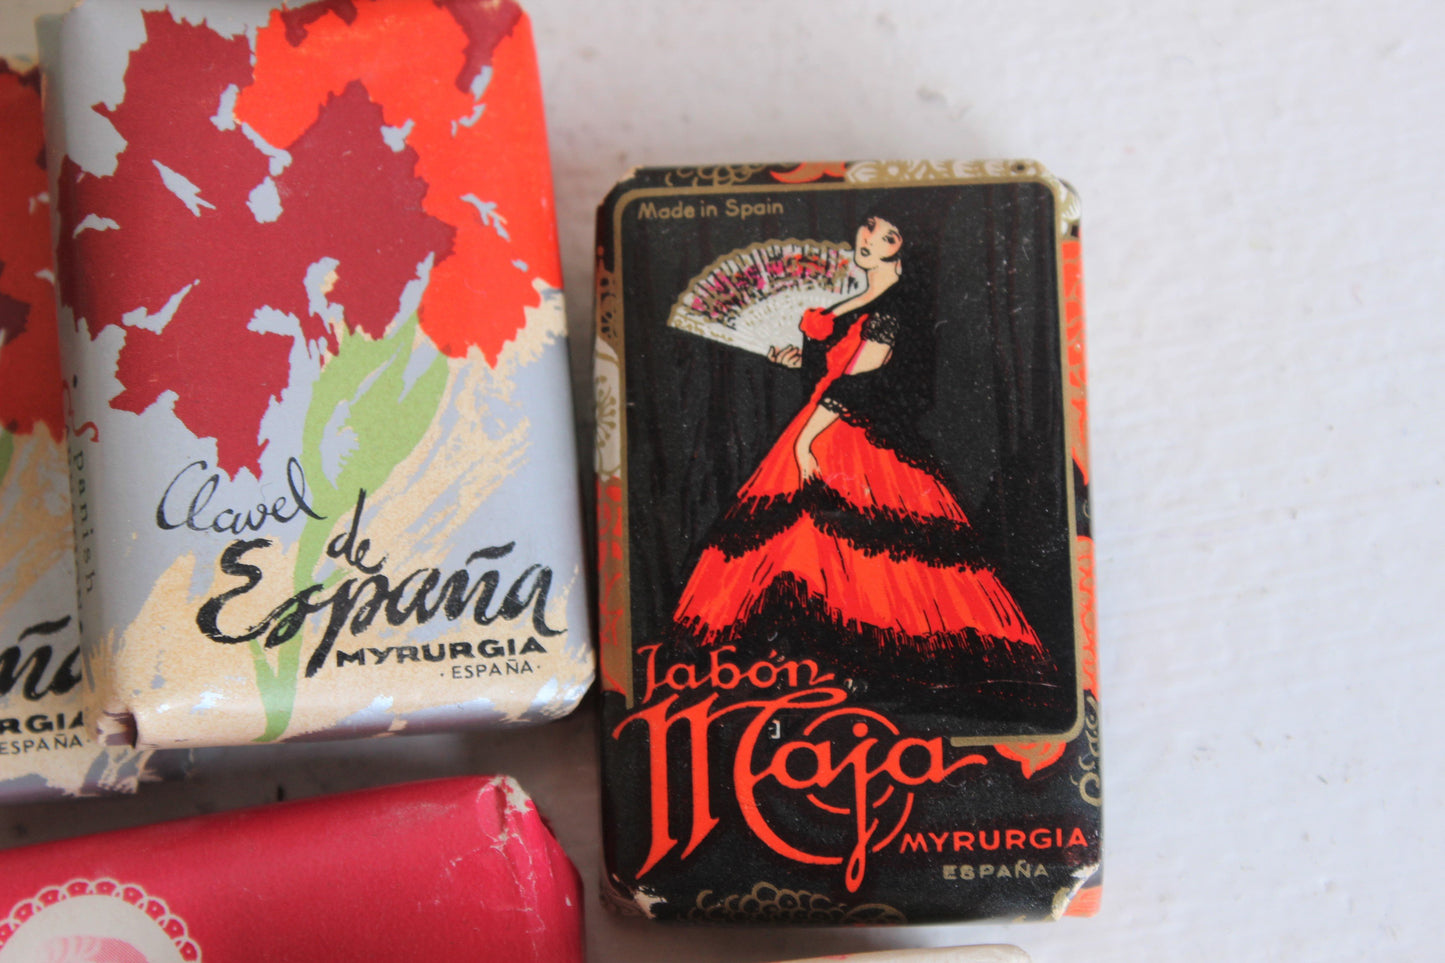 Vintage 1950s Travel Soaps ( and a sachet too!)